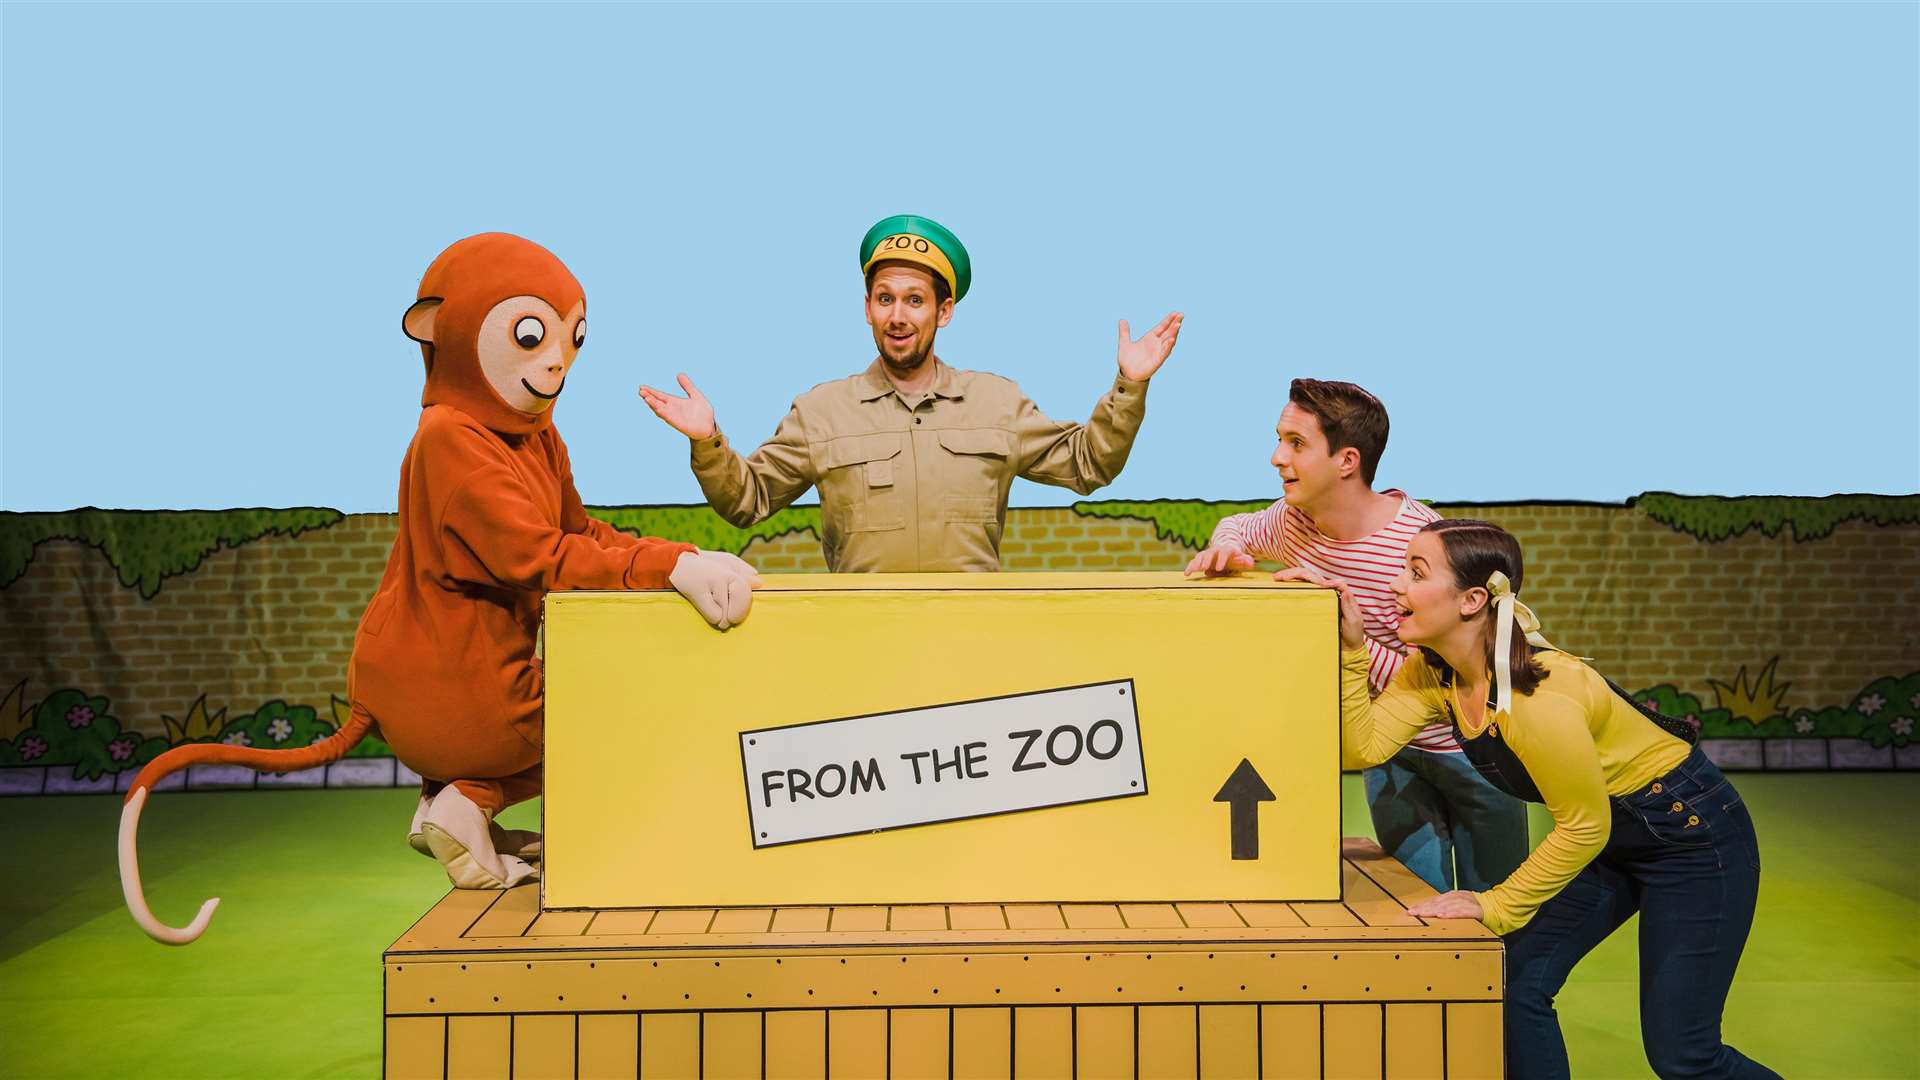 Dear Zoo is based on the popular children's book